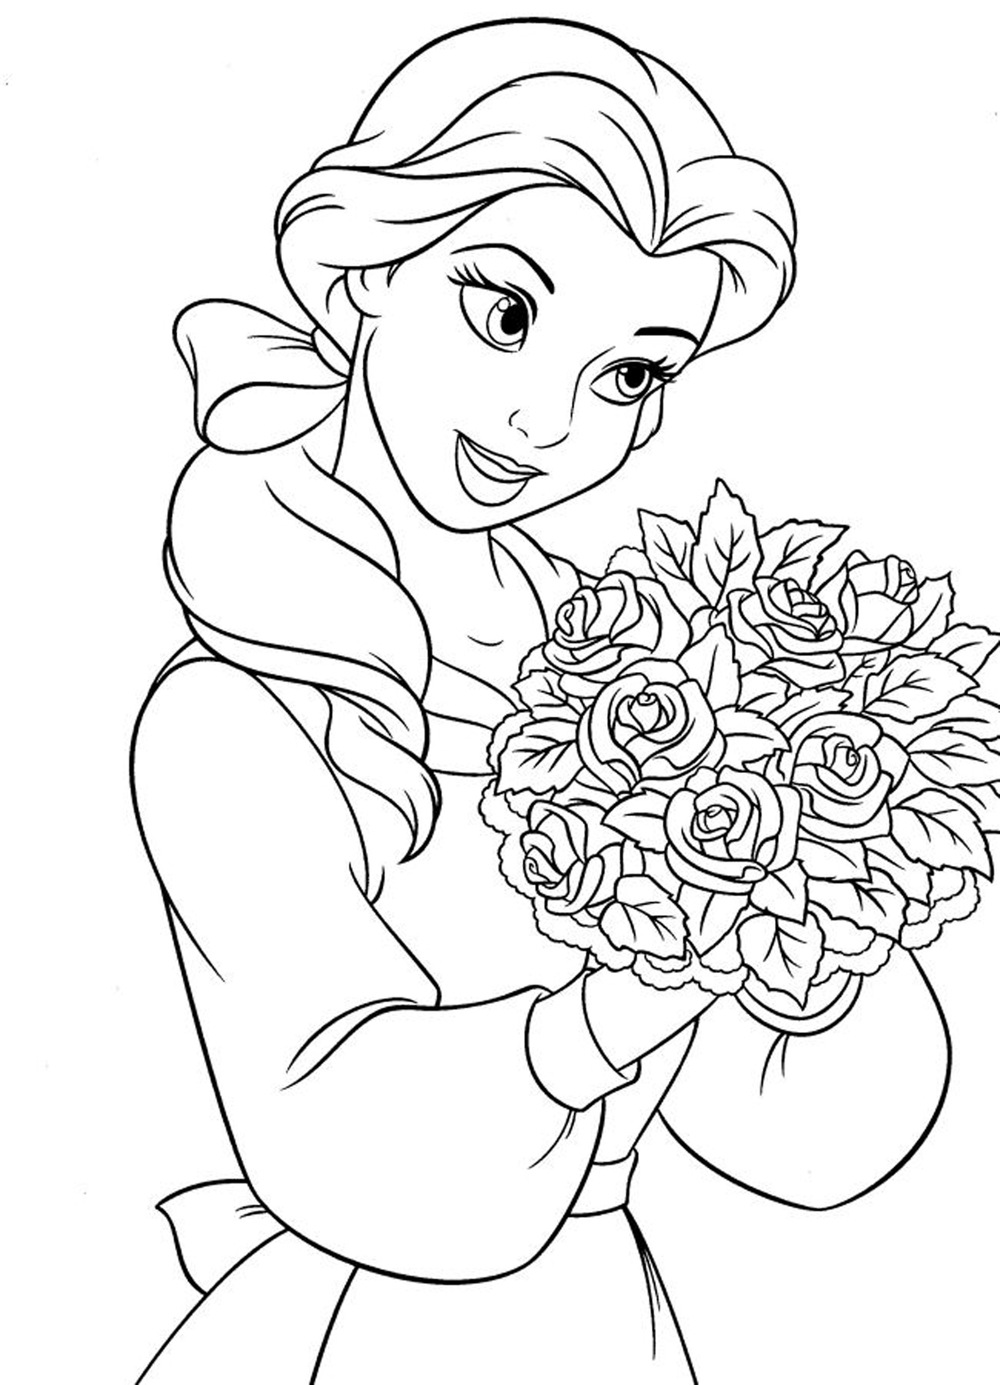  Cute Princess Disney Coloring Pages for kids | Disney coloring pages |